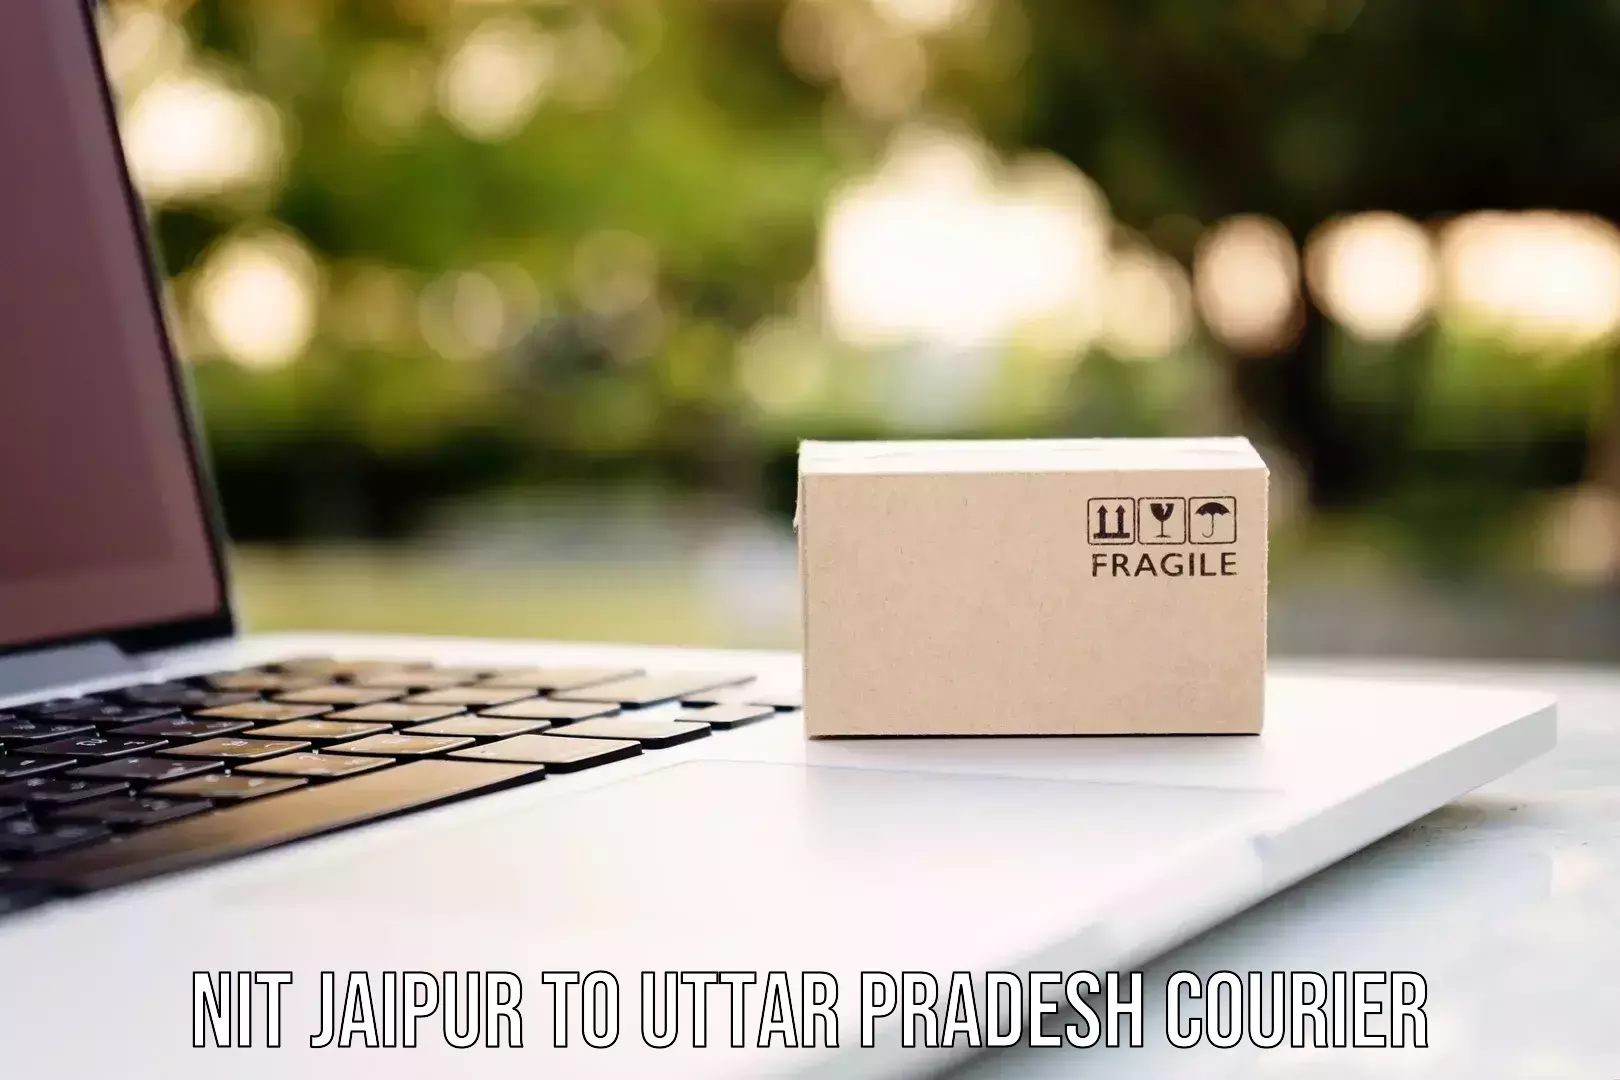 Courier service booking NIT Jaipur to IIT Kanpur